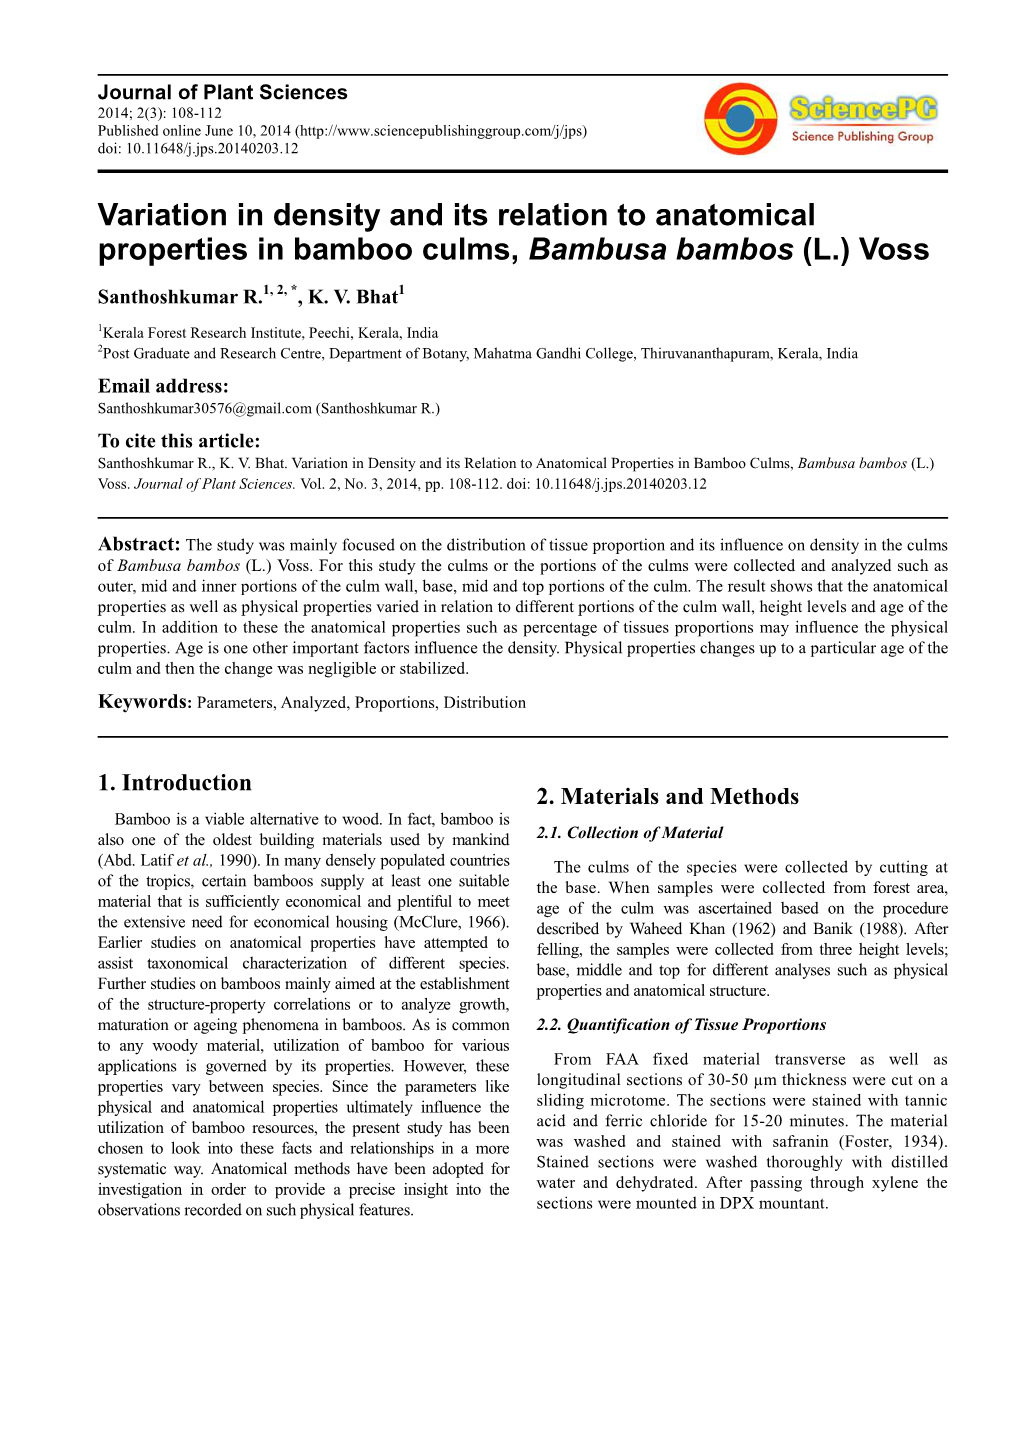 Variation in Density and Its Relation to Anatomical Properties in Bamboo Culms, Bambusa Bambos (L.) Voss